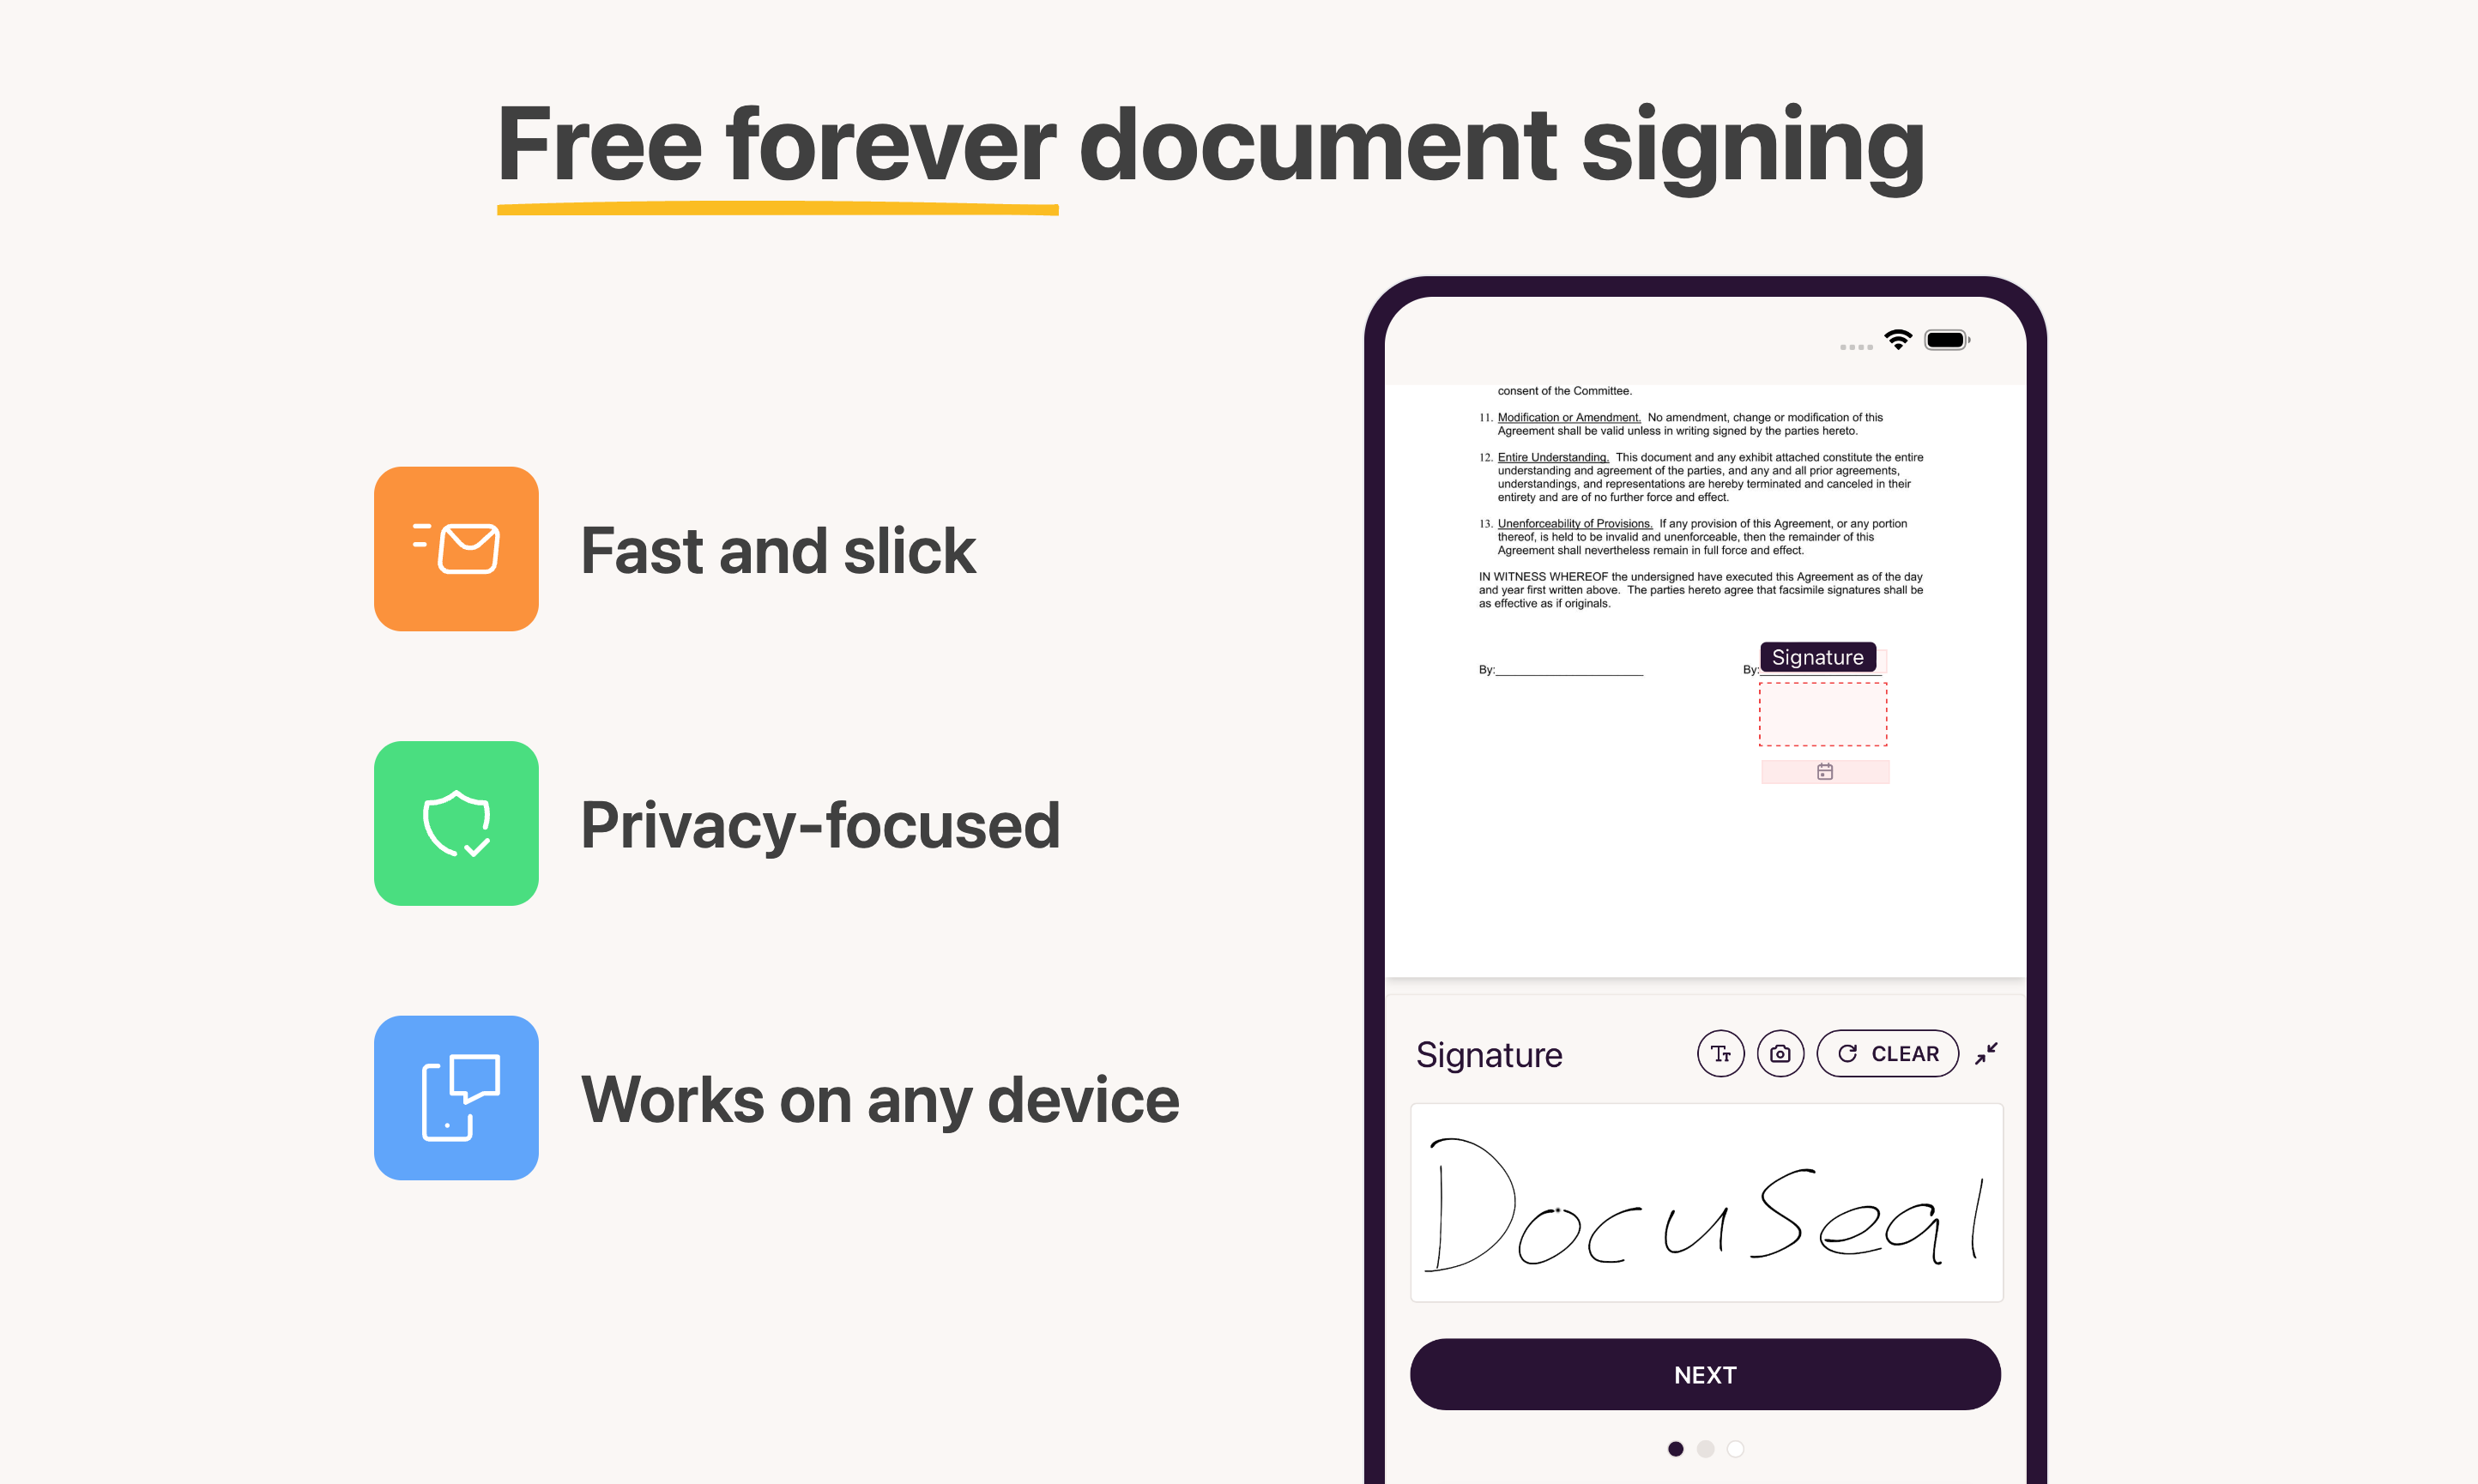 DocuSeal Free forever document signing